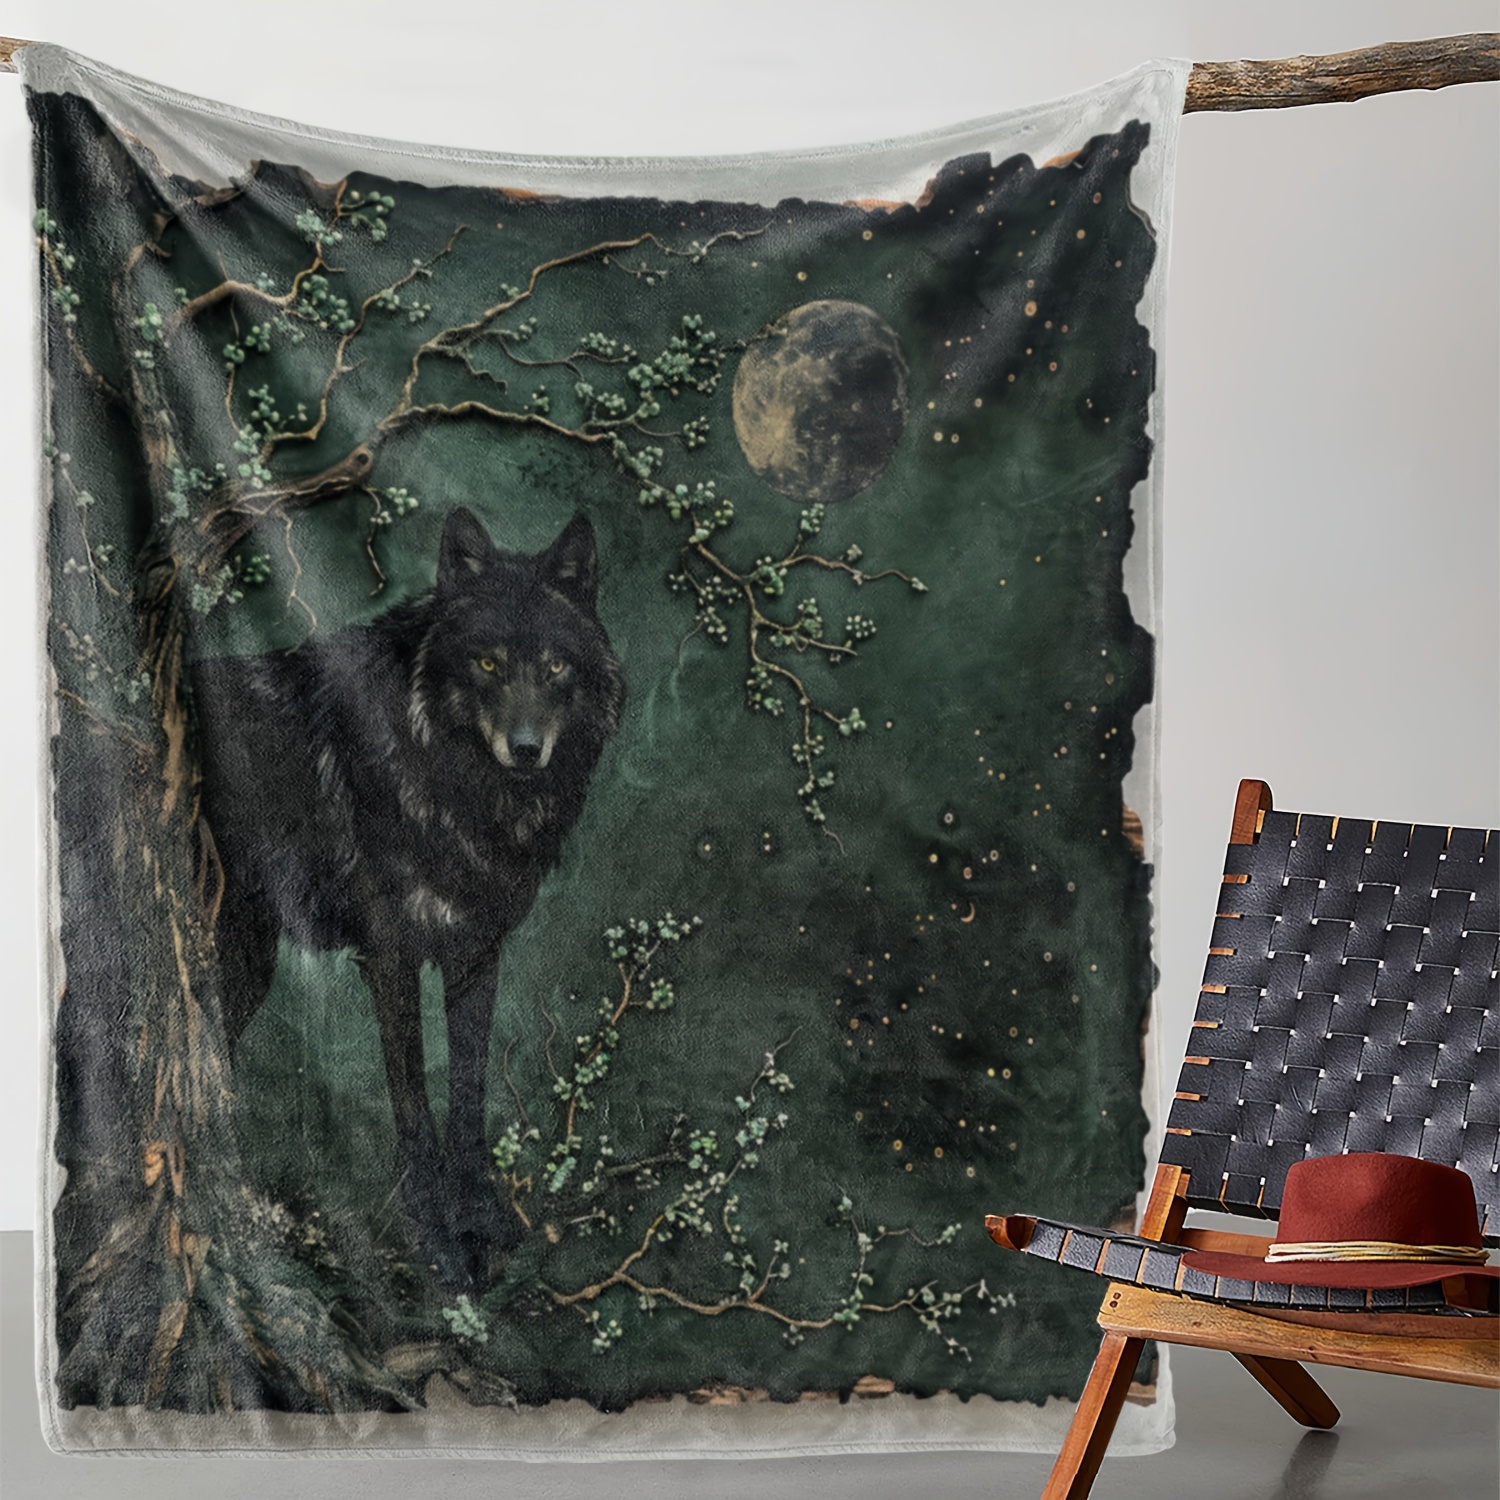 

Vintage Wolf Print Flannel Throw Blanket – Comfy Cozy All-season Knitted Digital Print Polyester Cover, Soft Sofa Bed Office Camping Travel Gift Blanket, 250-300g Fabric Weight